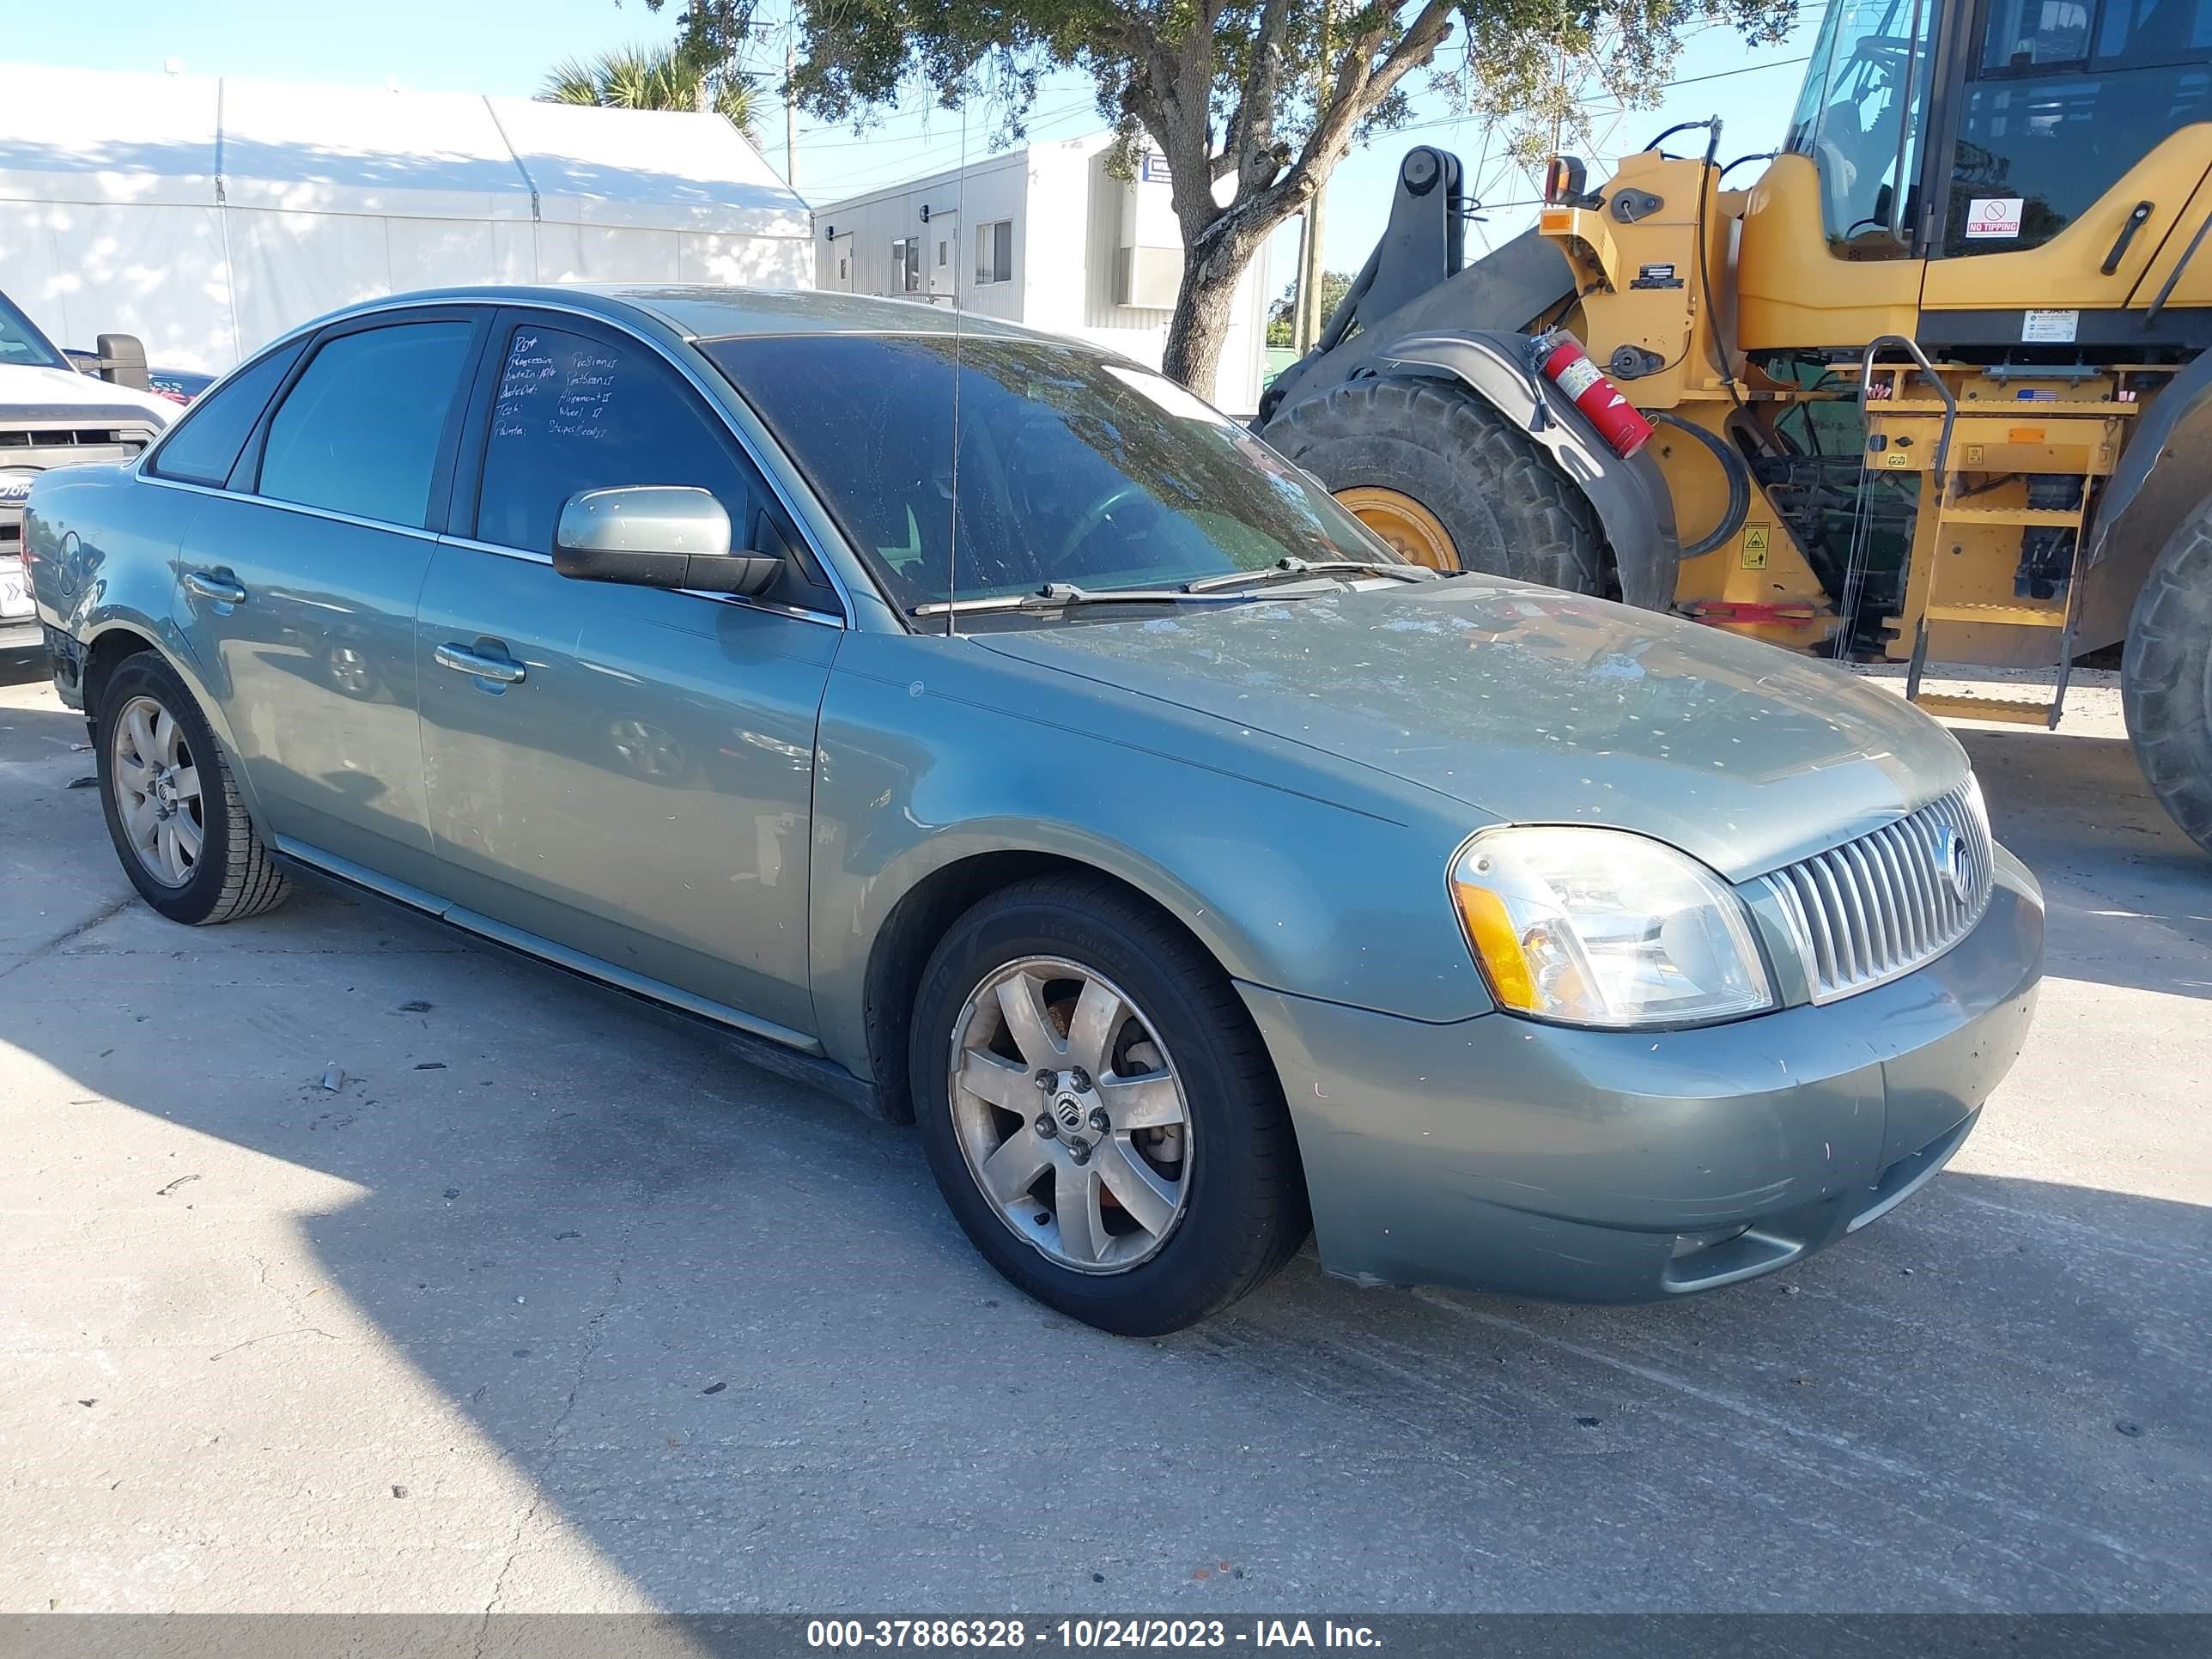 vin: 1MEHM40187G614253 1MEHM40187G614253 2007 mercury montego 3000 for Sale in 33760, 5152 126Th Ave N, Clearwater, USA